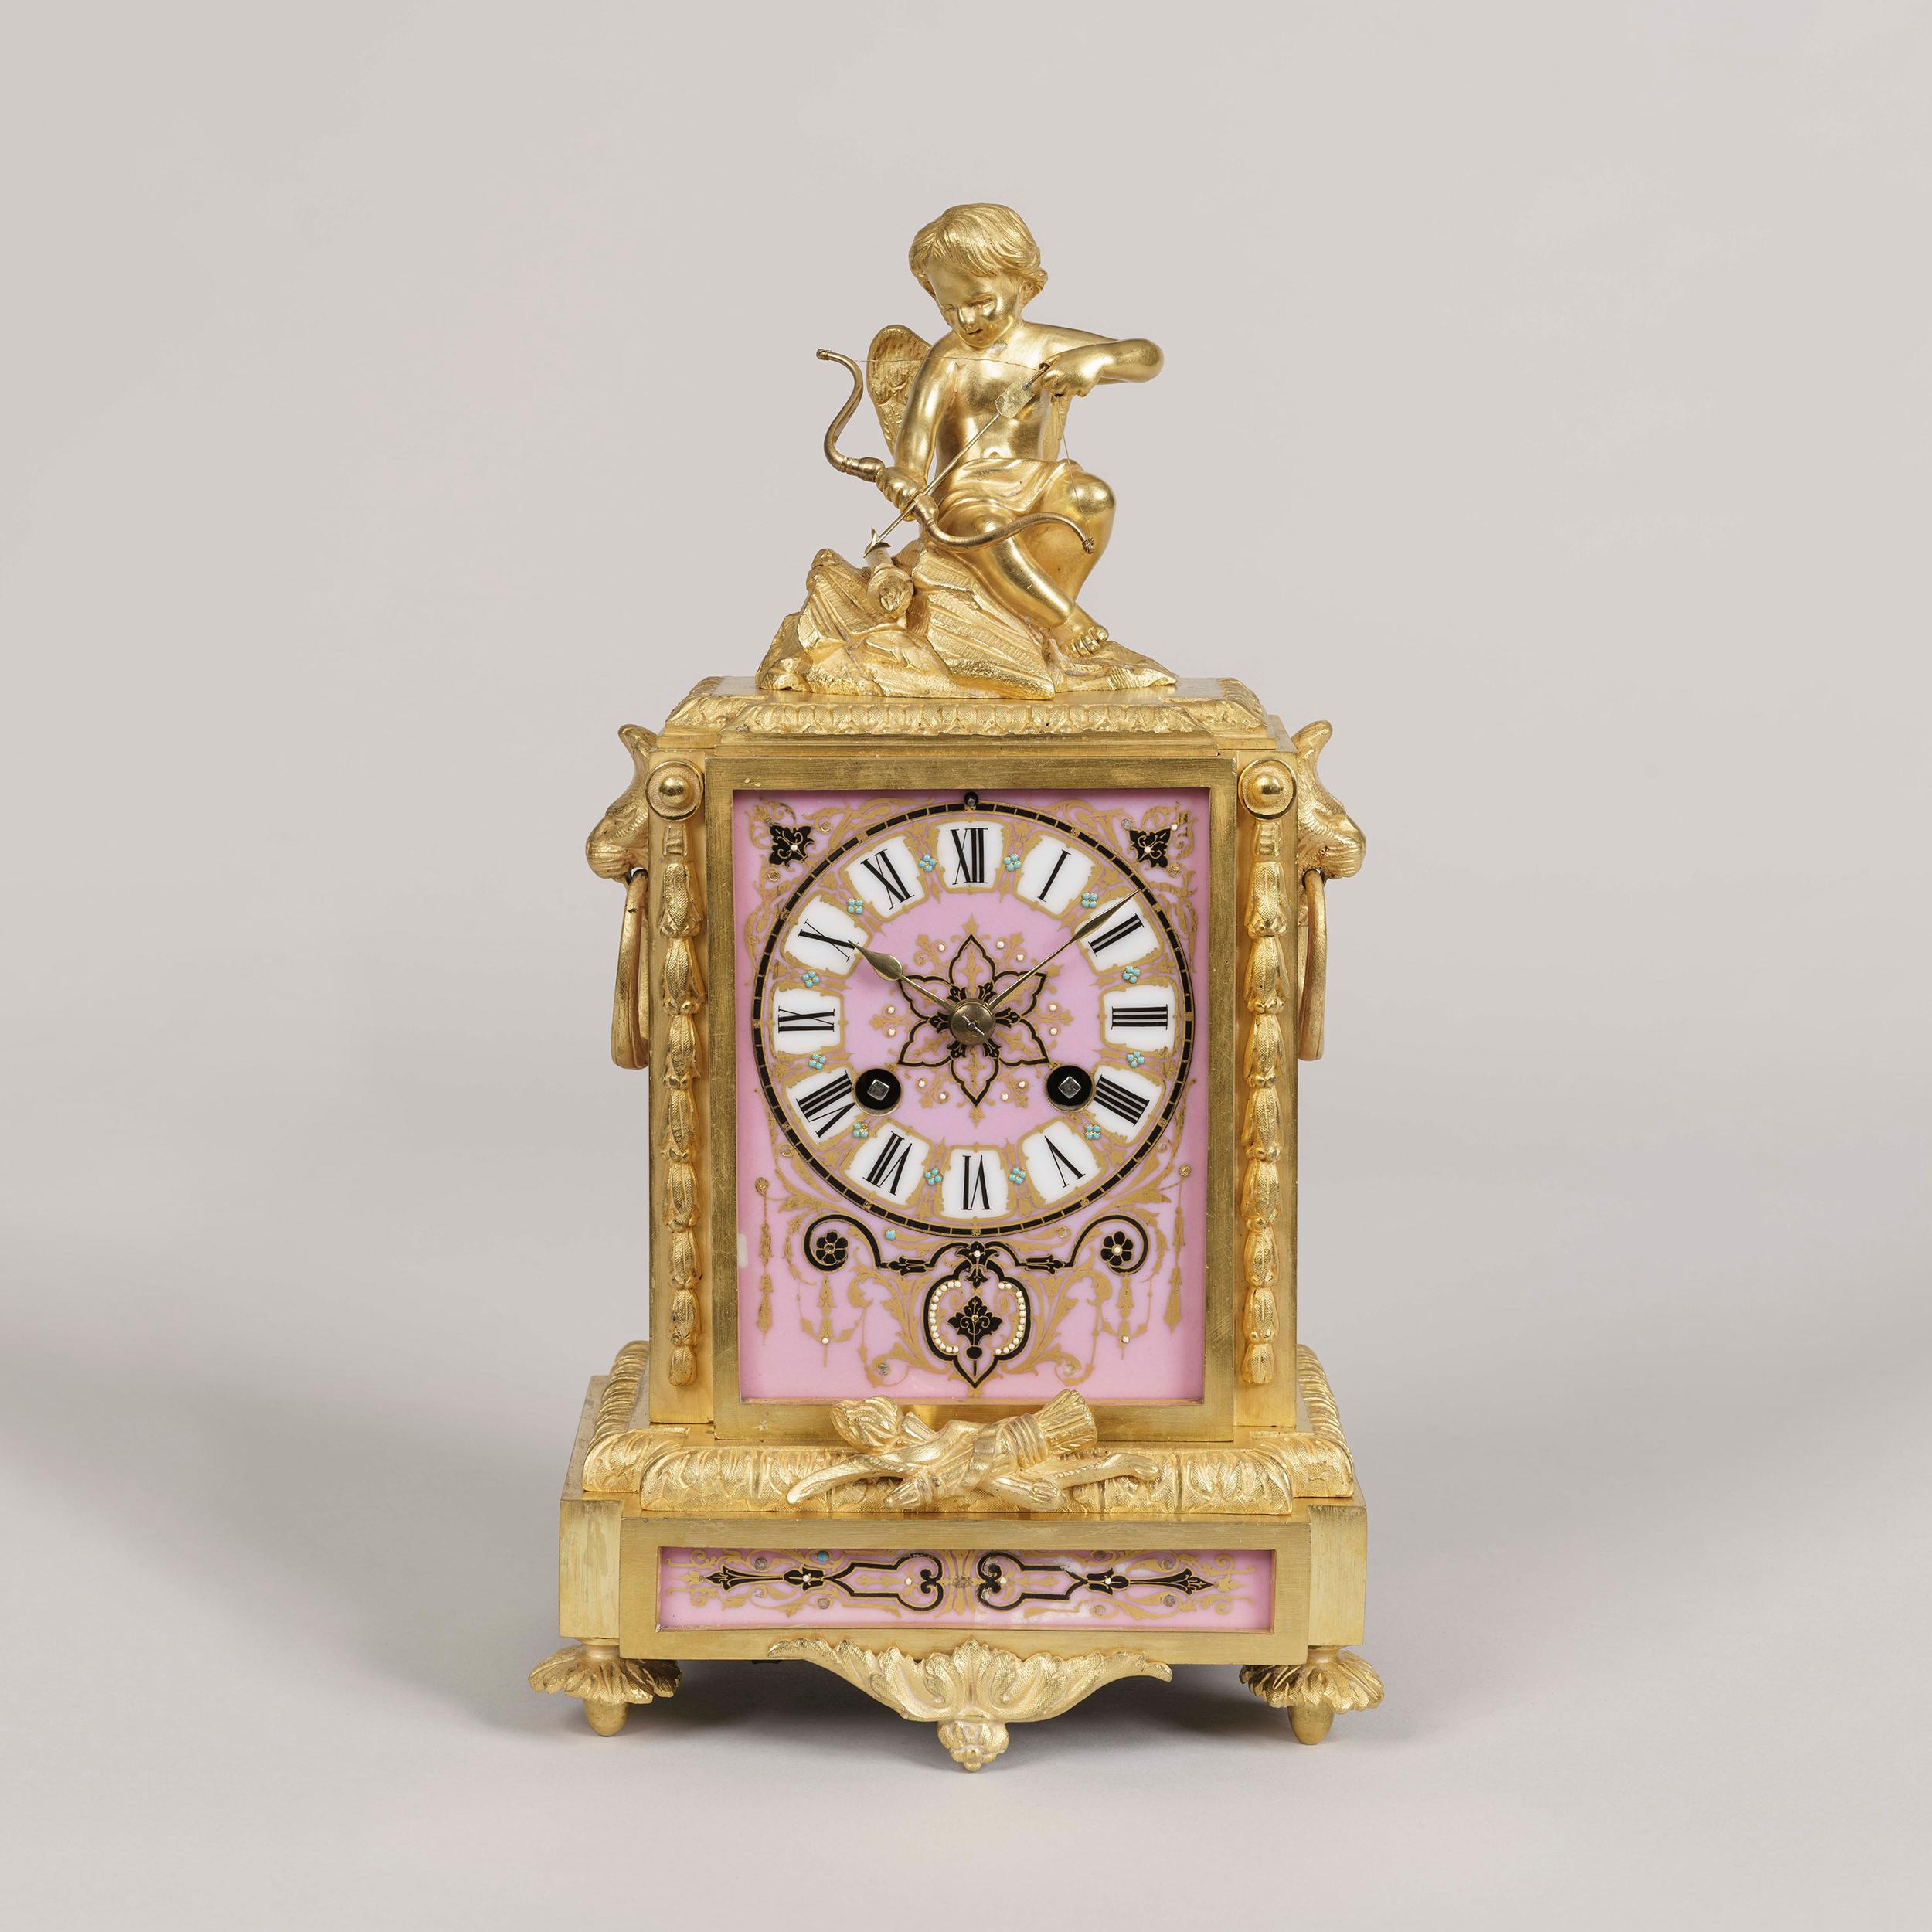 A Symbolic clock in the Louis XVI style
By Japy Fréres et Cie.

The finely chased ormolu case encompassing pink porcelain panels decorated with beads to the face and sides; the whole surmounted by the figure of cupid and his bow. The decorated